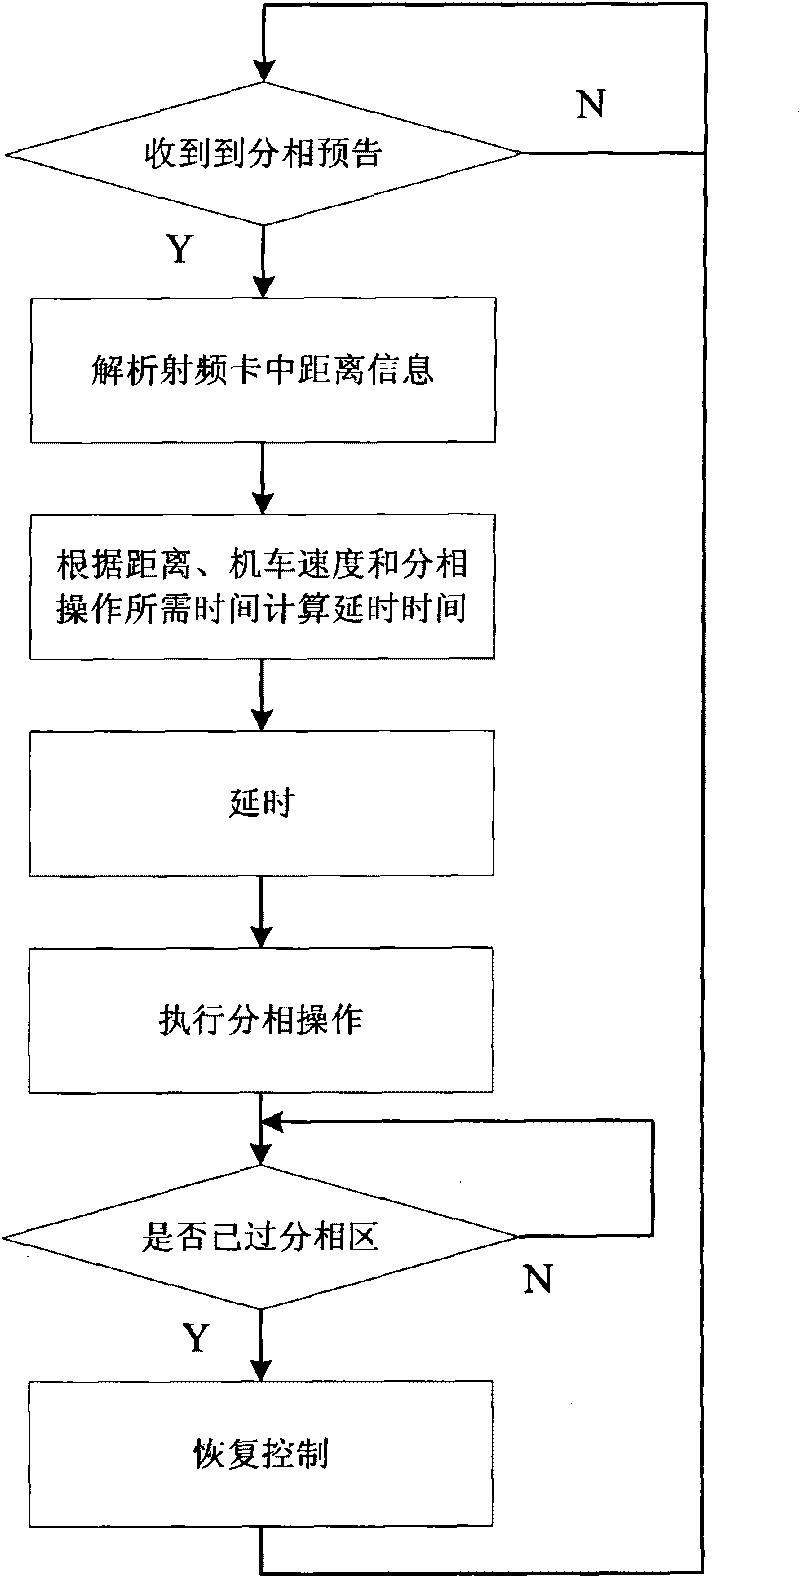 Electrical locomotive auto-passing neutral section control system and method